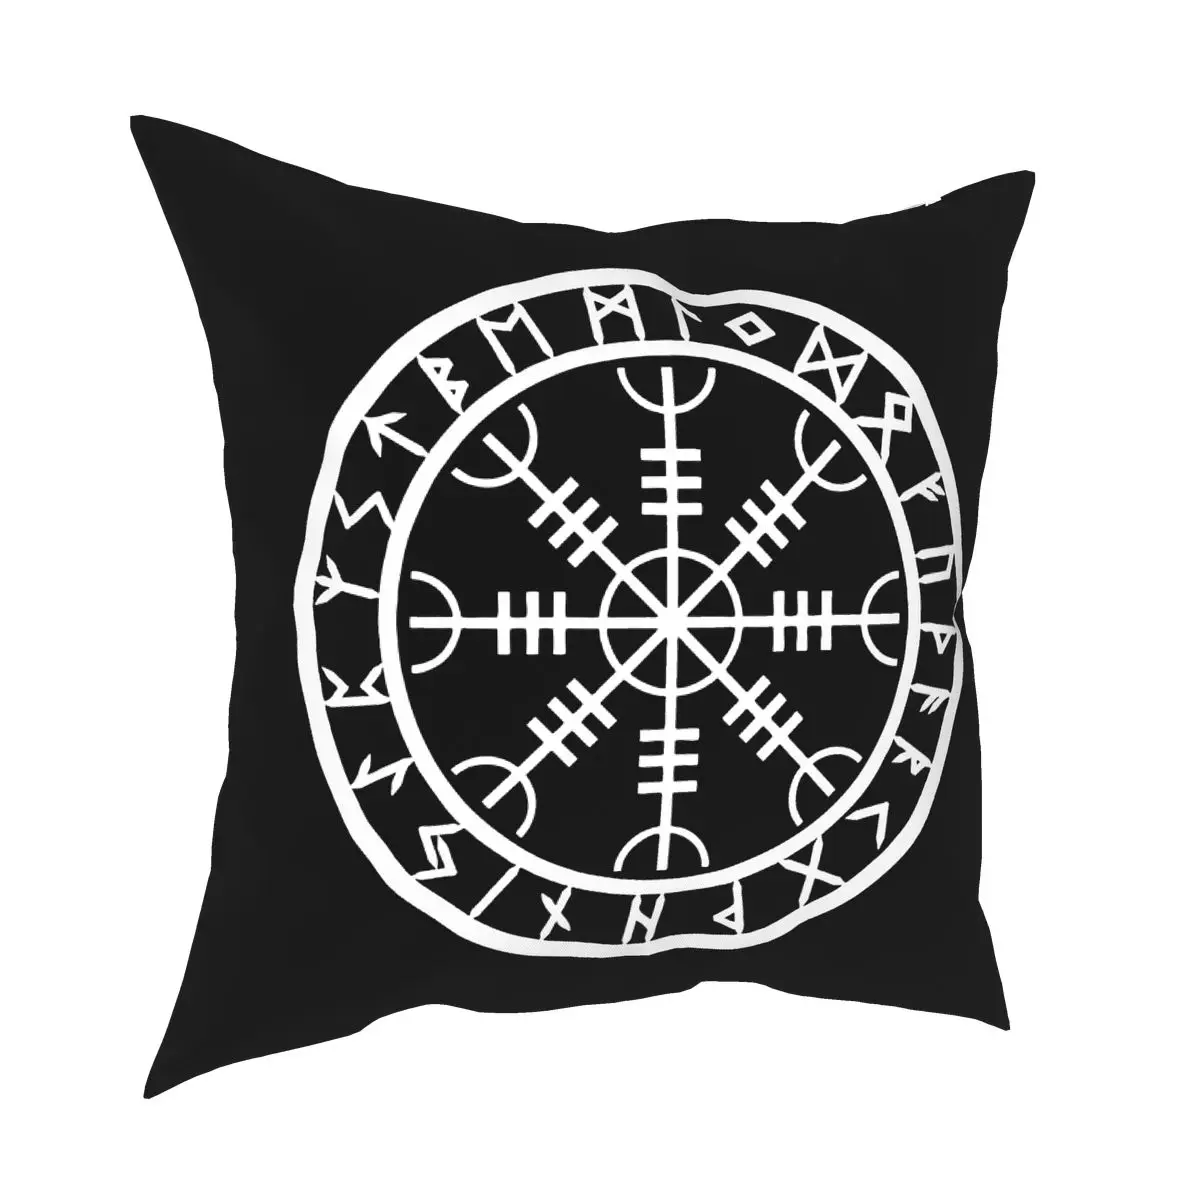 

Helm Of Awe Rune Circle Viking Pillowcase Soft Polyester Cushion Cover Decor Pillow Case Cover Car Square 45X45cm